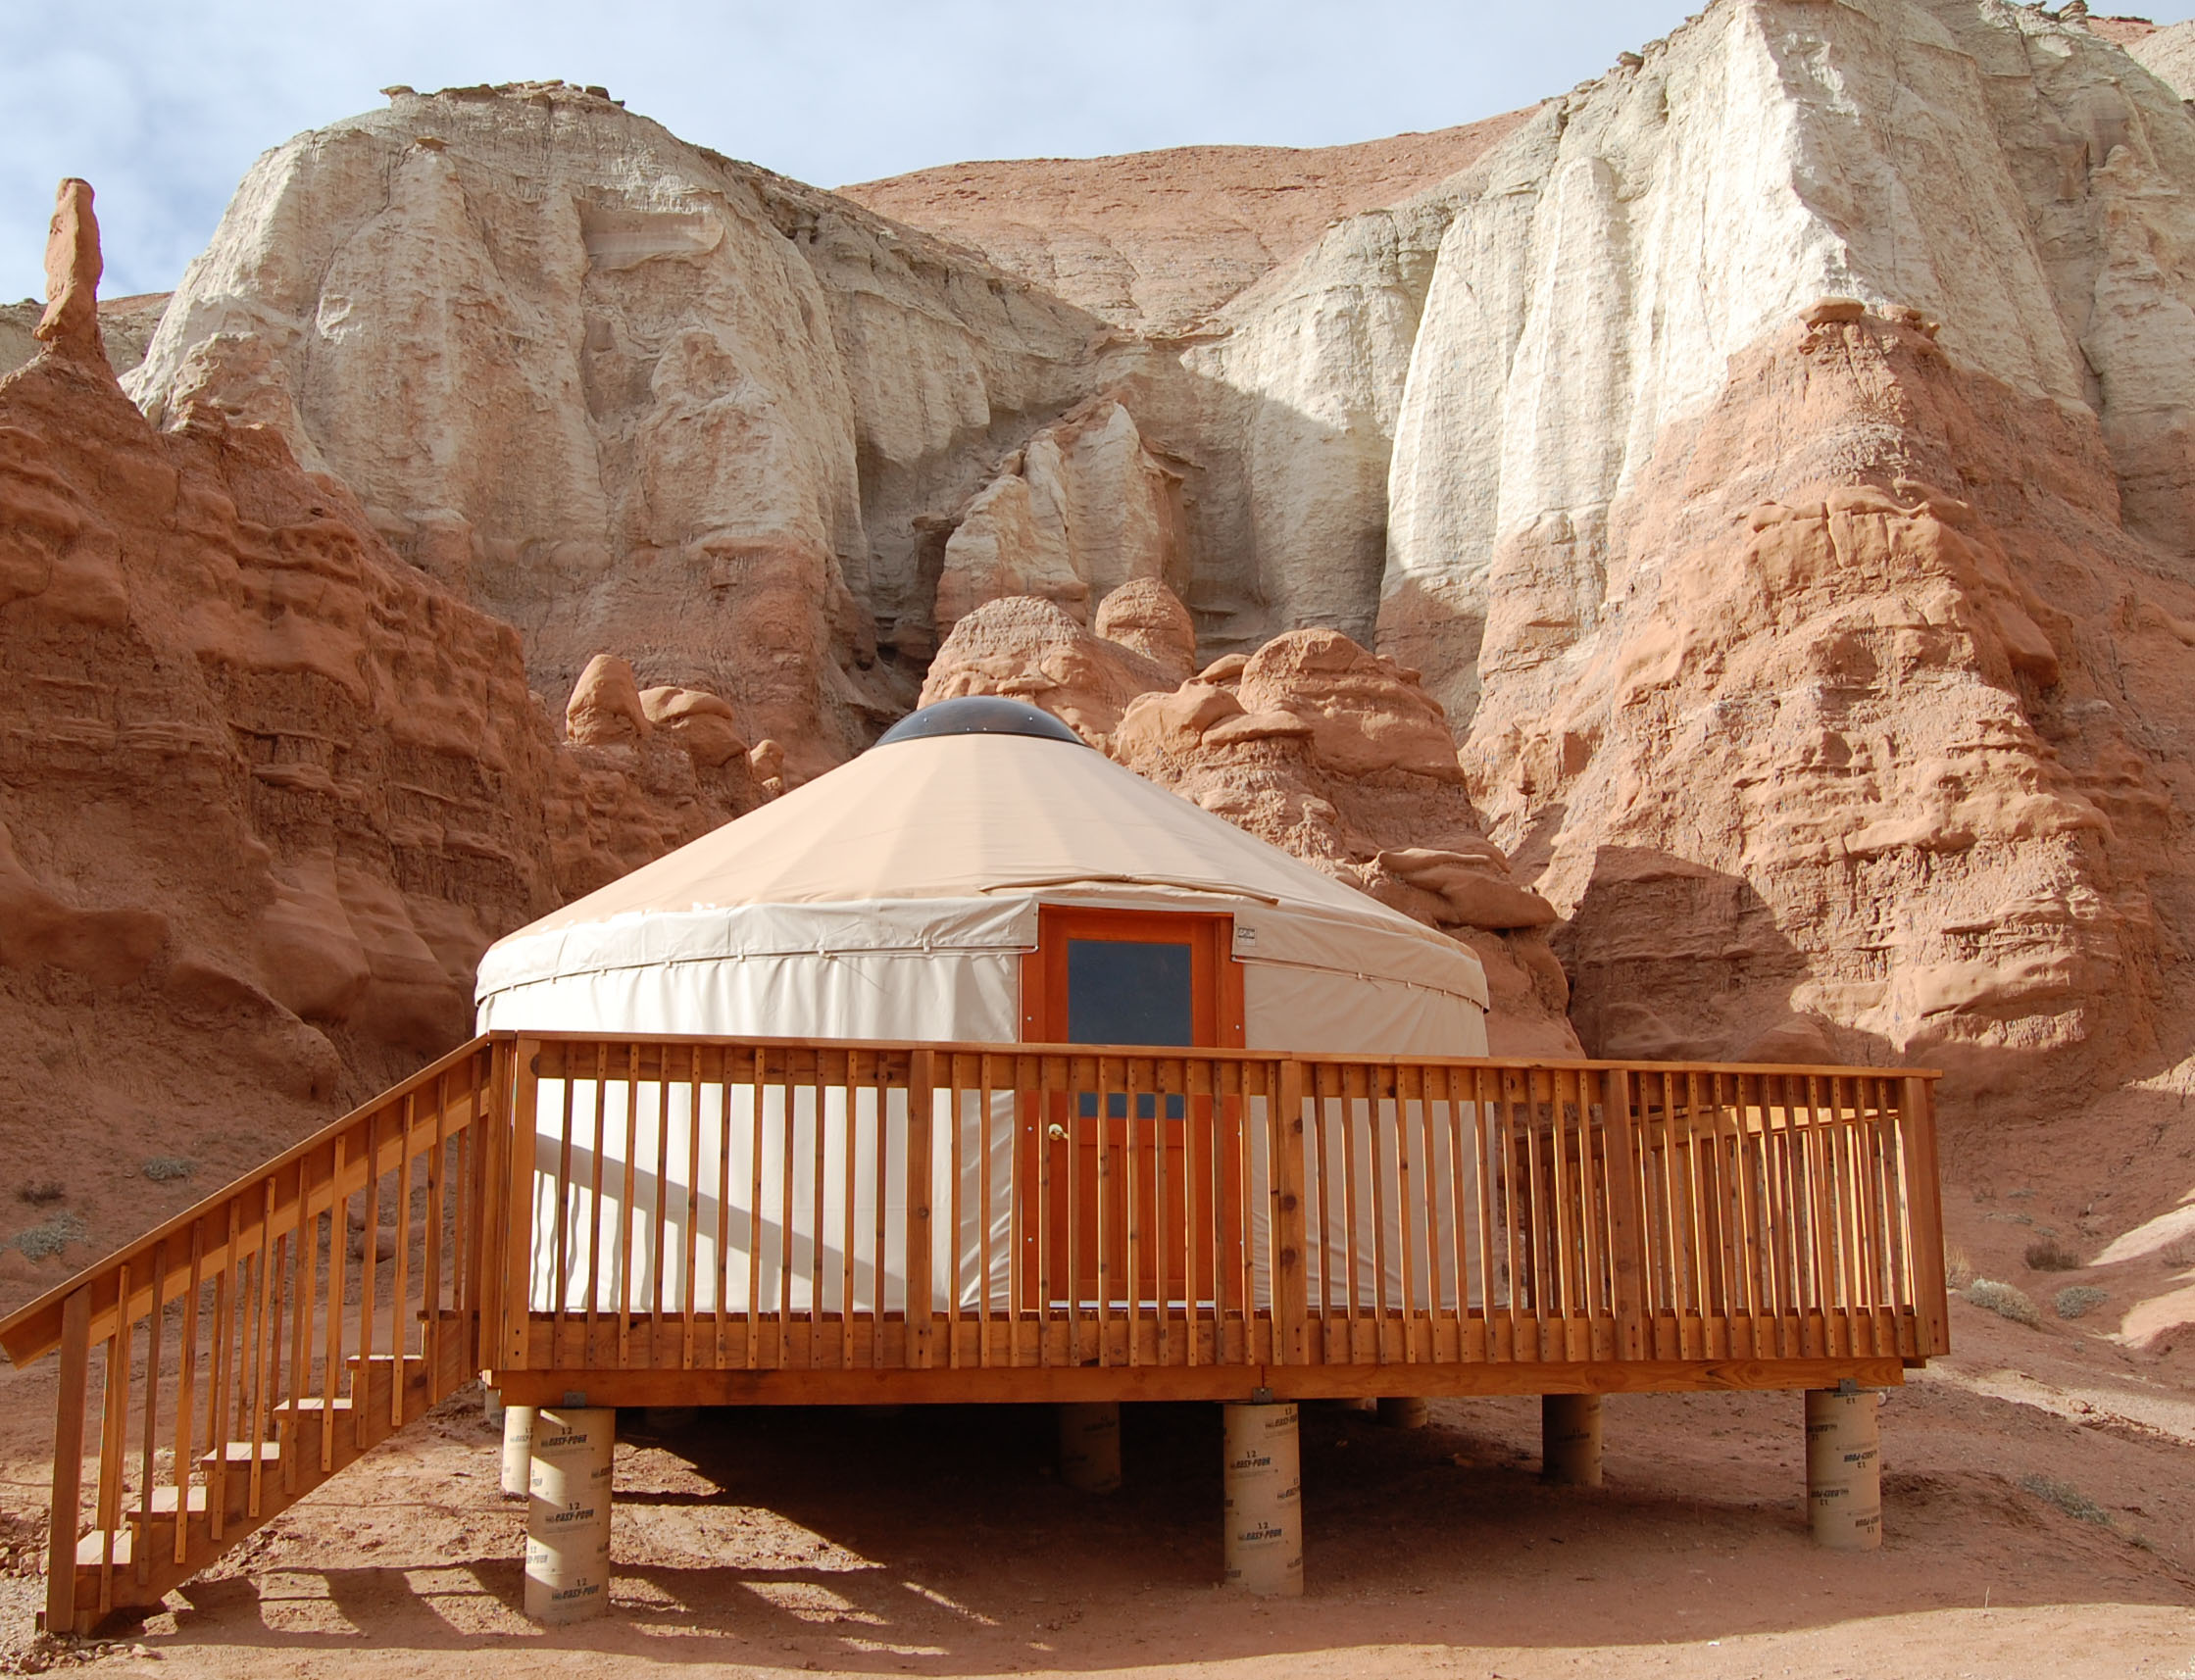 Yurts are available to rent at Goblin Valley